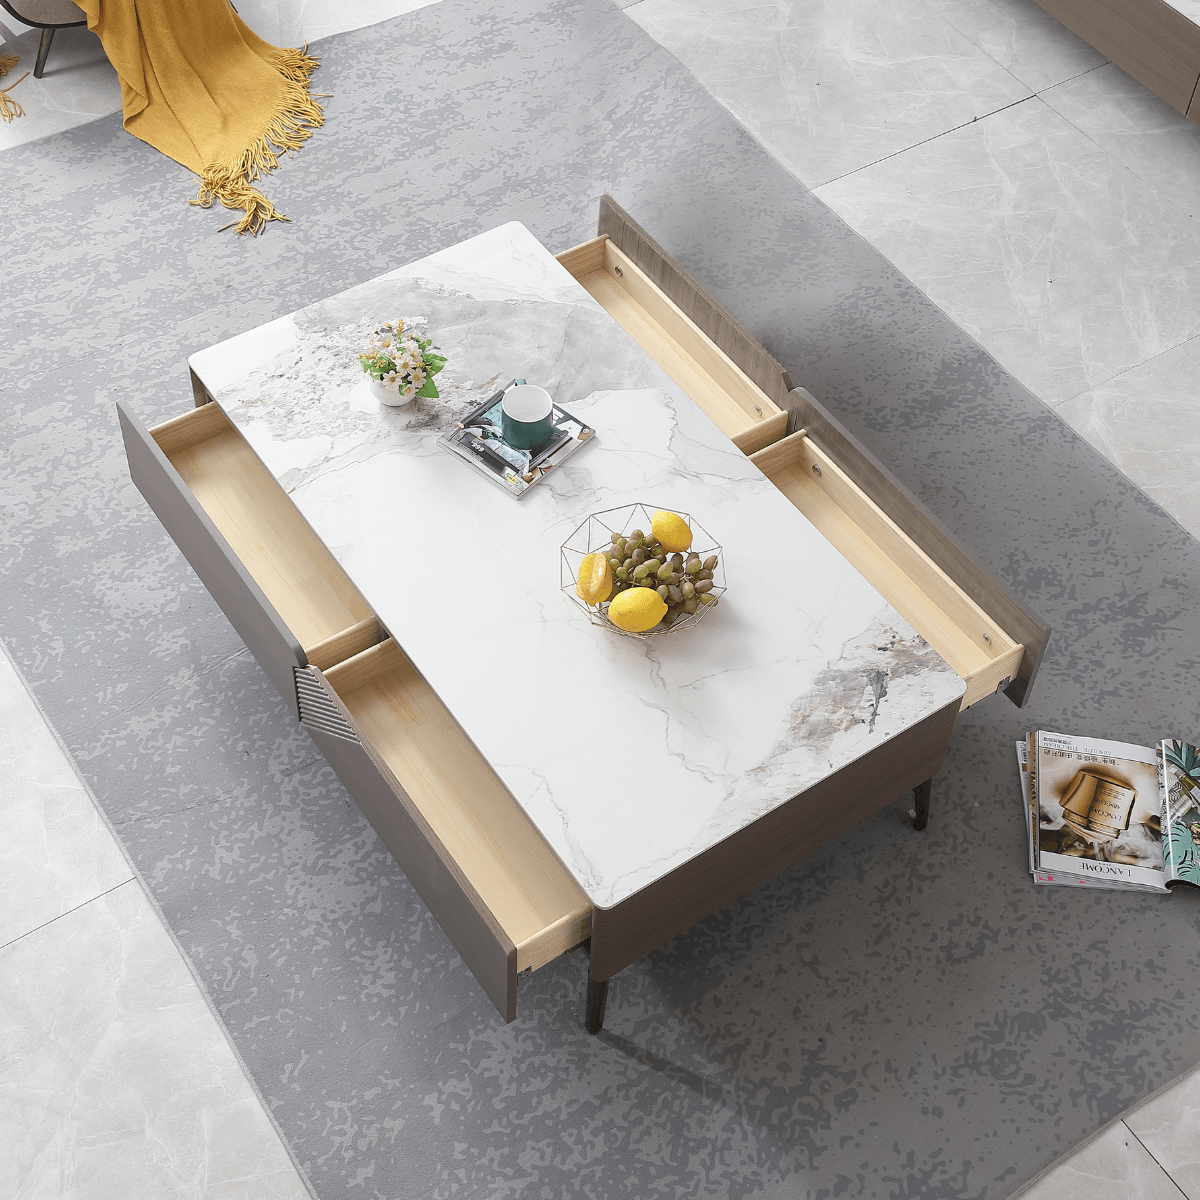 Clarity Glossy Sintered Stone Coffee Table Singapore